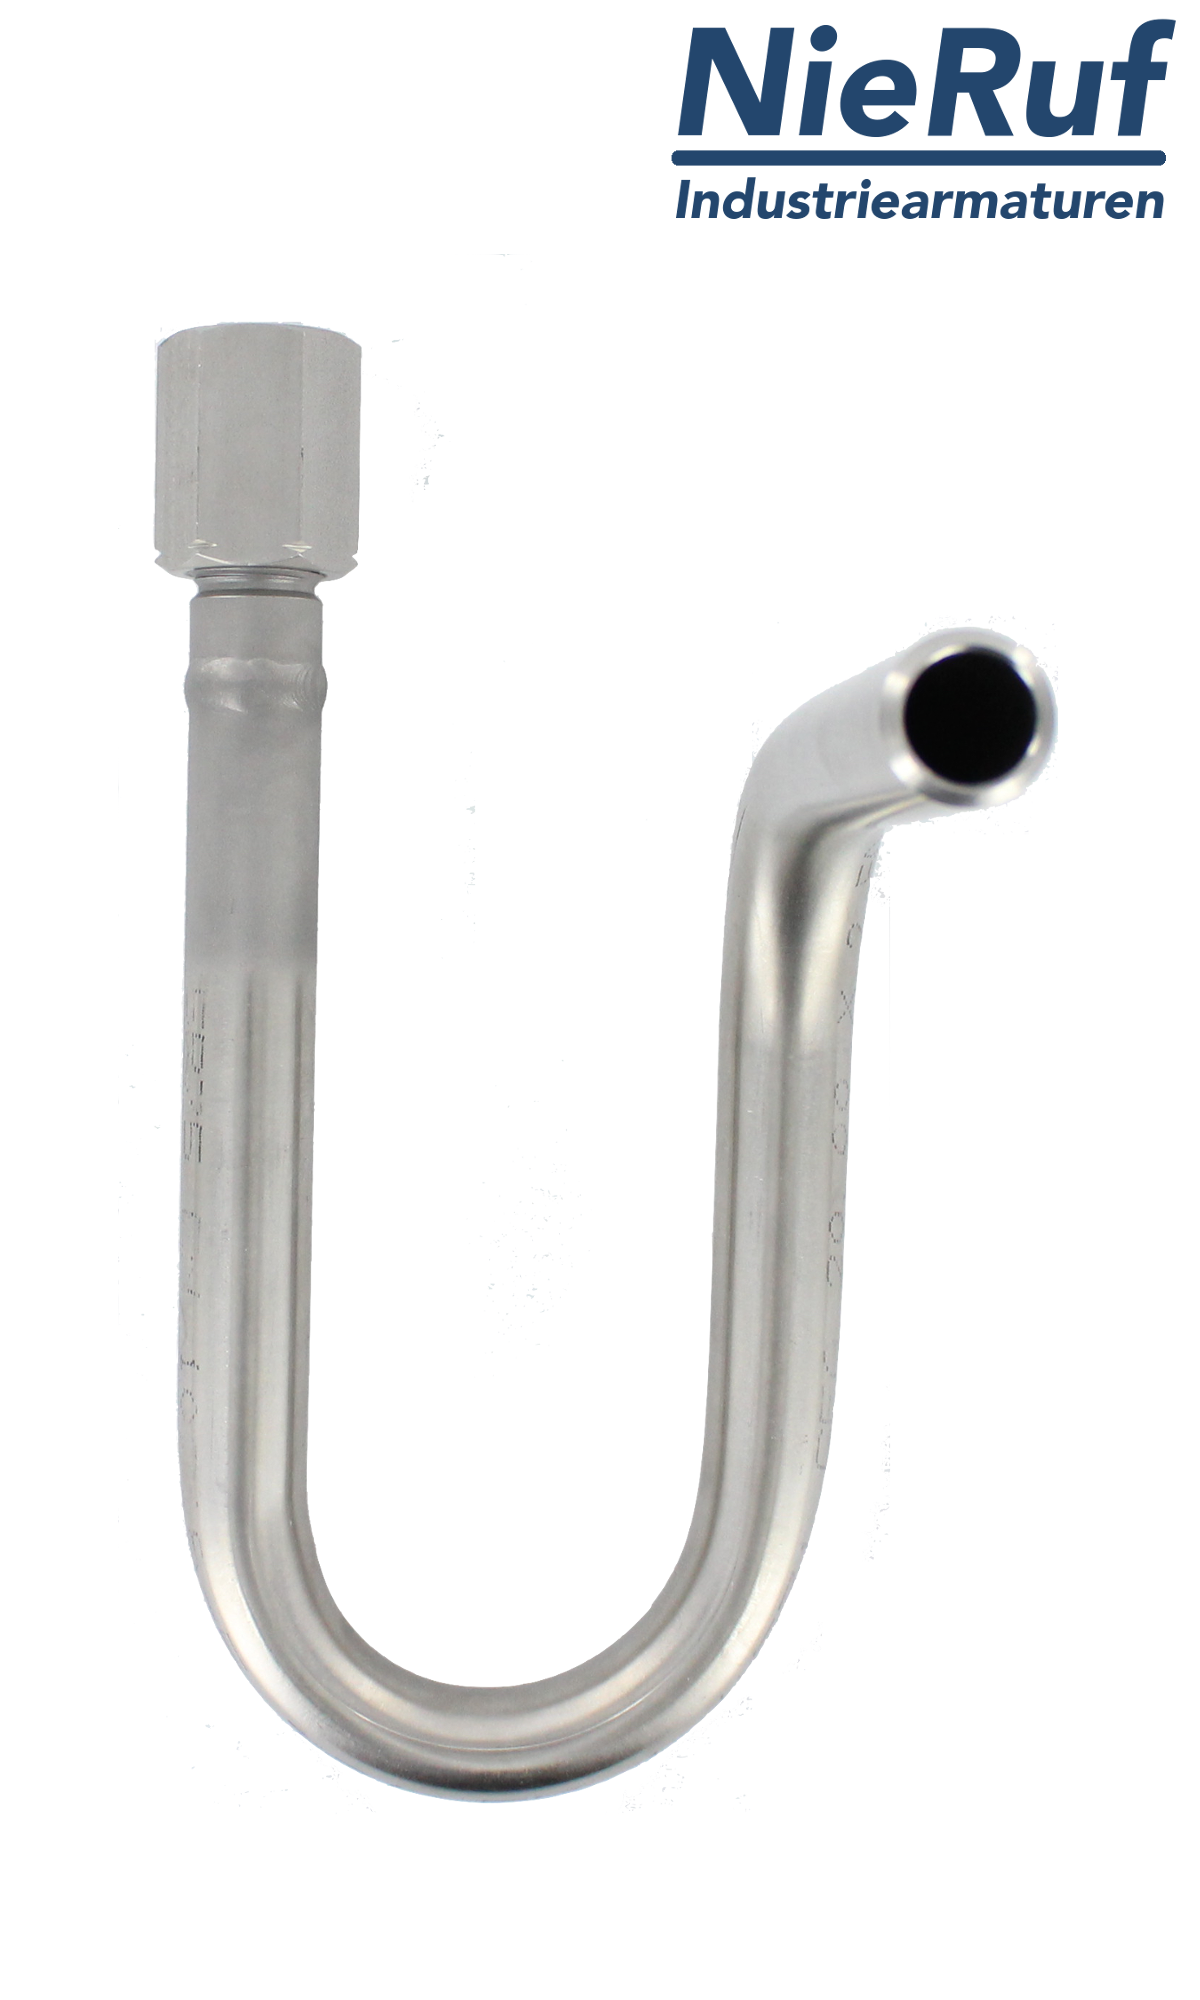 siphon in U-shape male thread x sleeve DIN 16282 - form A made of stainless steel 1.4571 1/2"